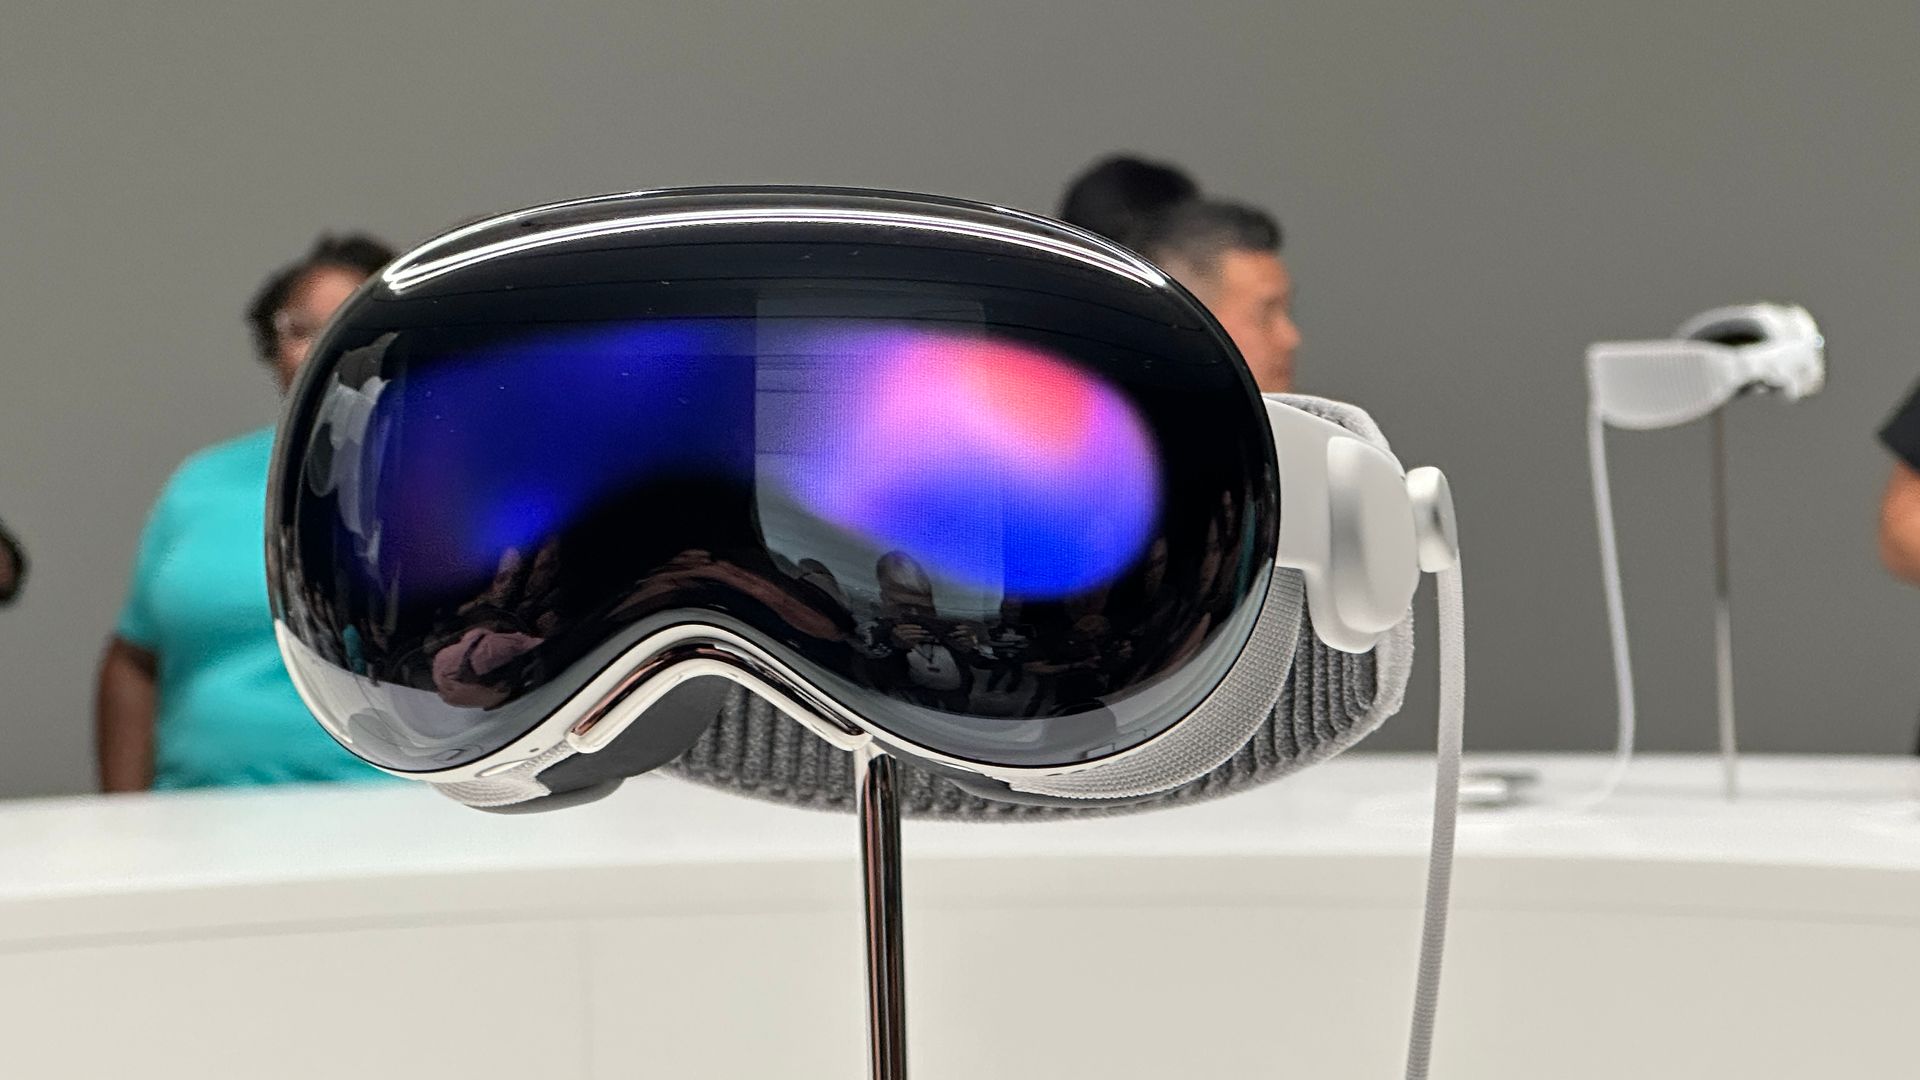 Apple's latest invention, the Vision Pro mixed-reality headset, is hitting store shelves on Friday, Feb. 2.